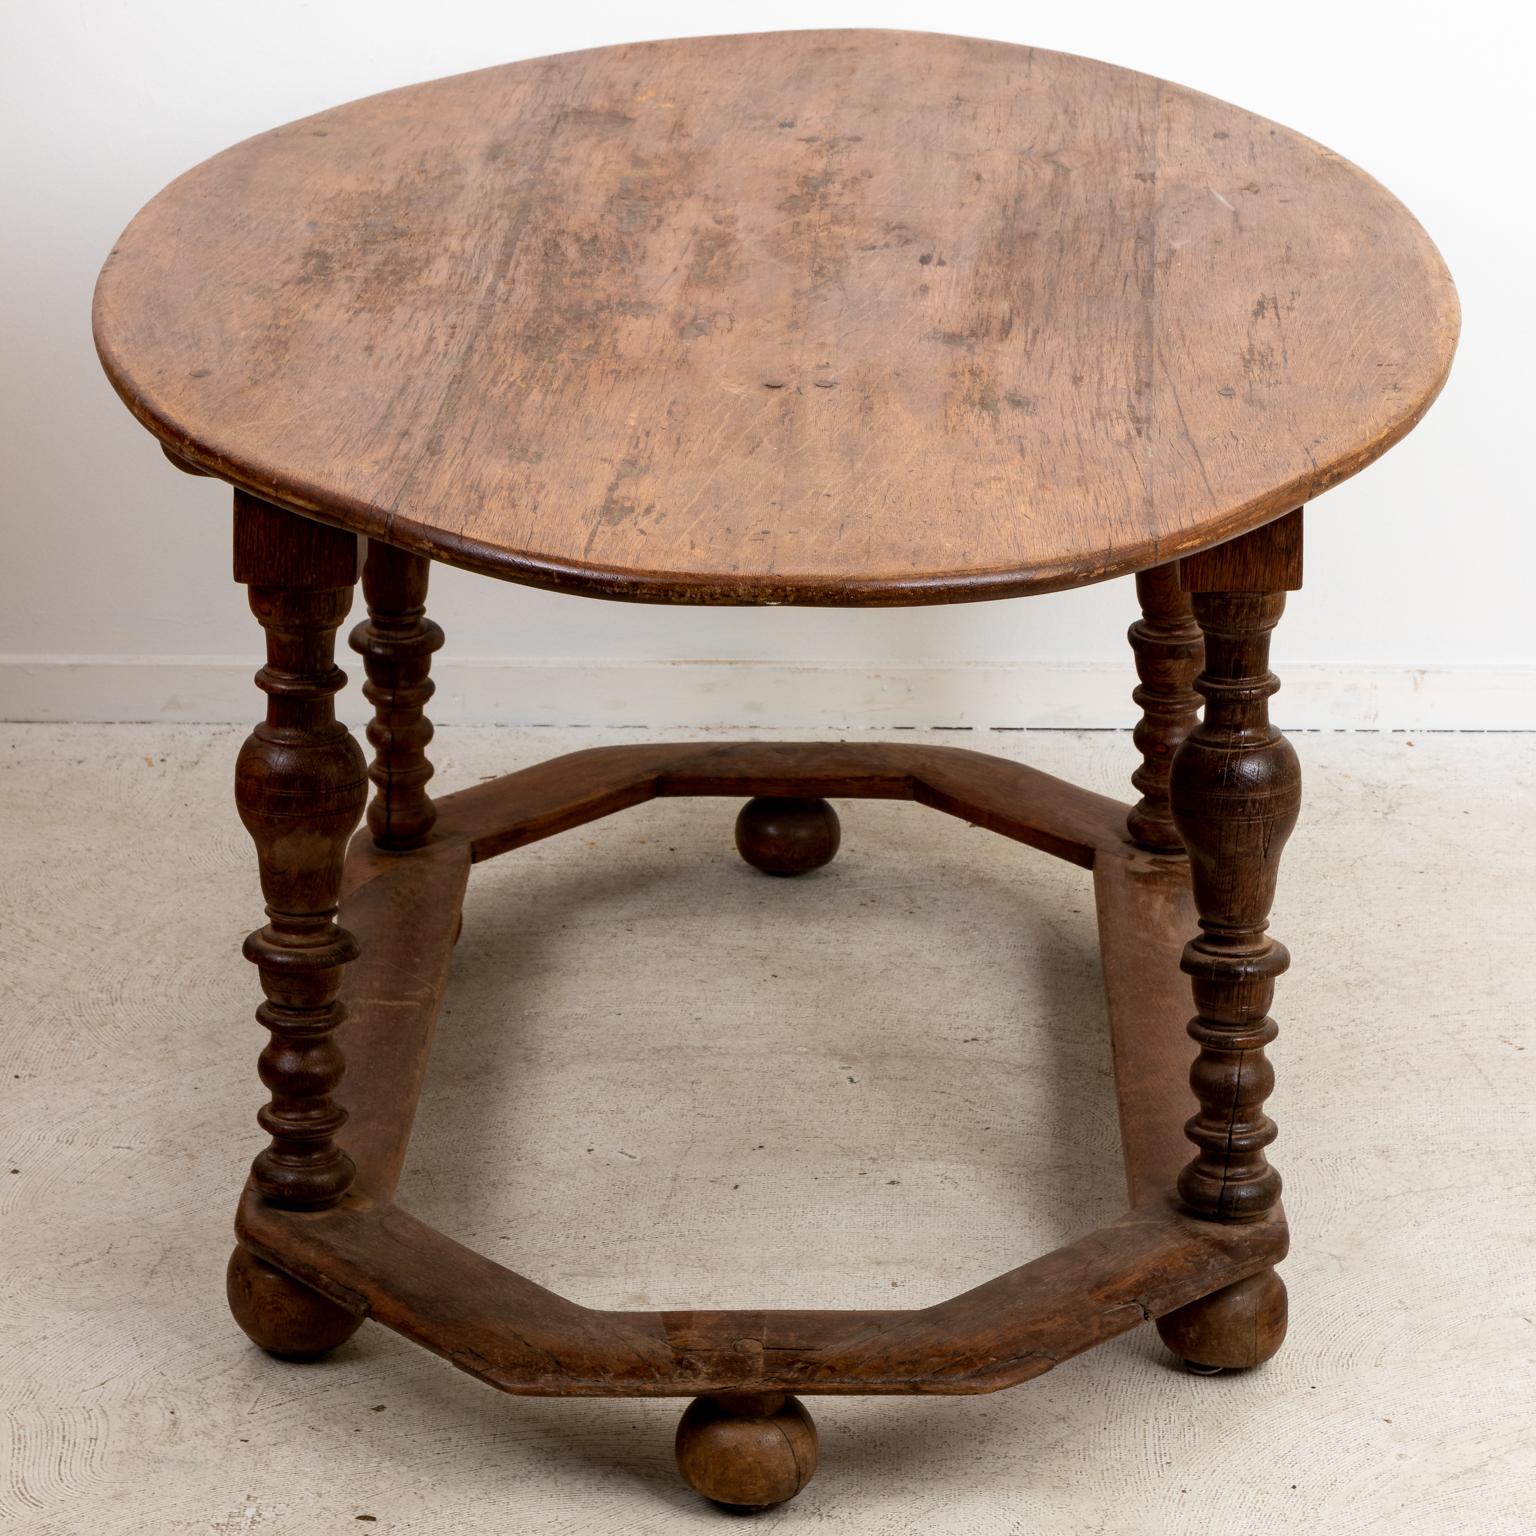 Circa 19th century English oak oval table with bottom stretcher and vase-and-ring turned legs on bun feet. Please note of wear consistent with age including minor wood loss, patina, and finish loss due to antique age.